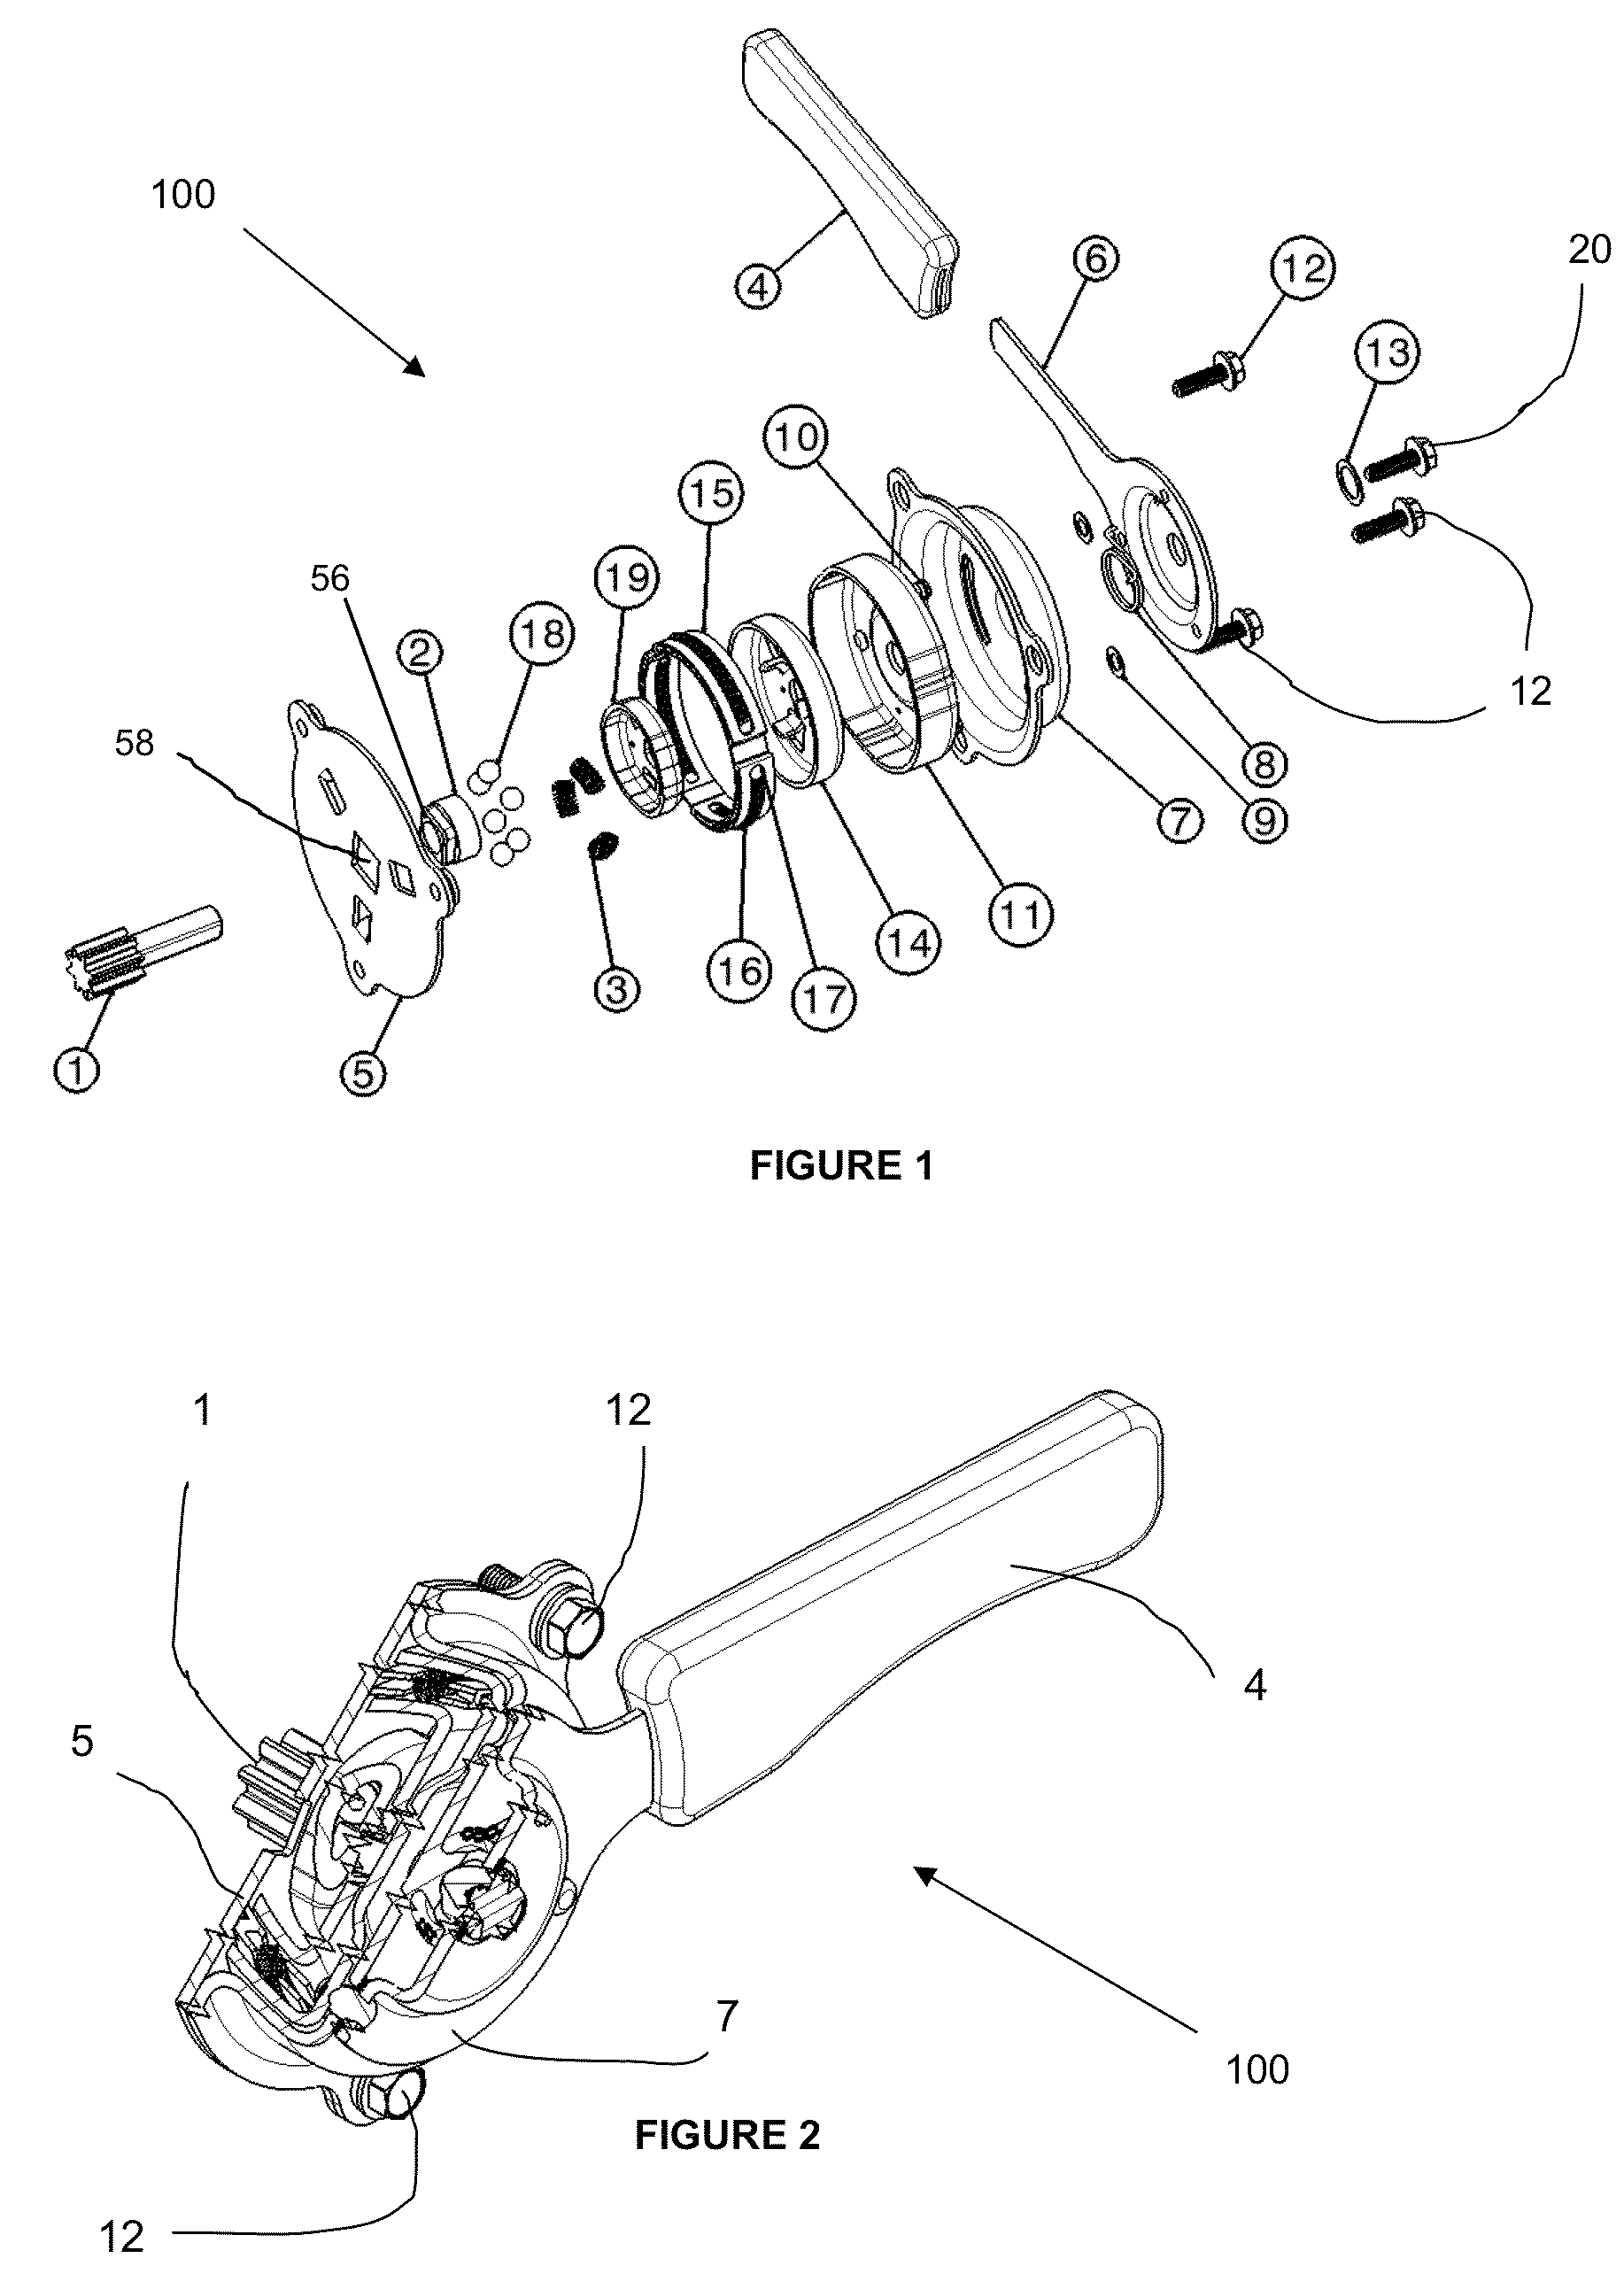 Seat height adjustment actuating device